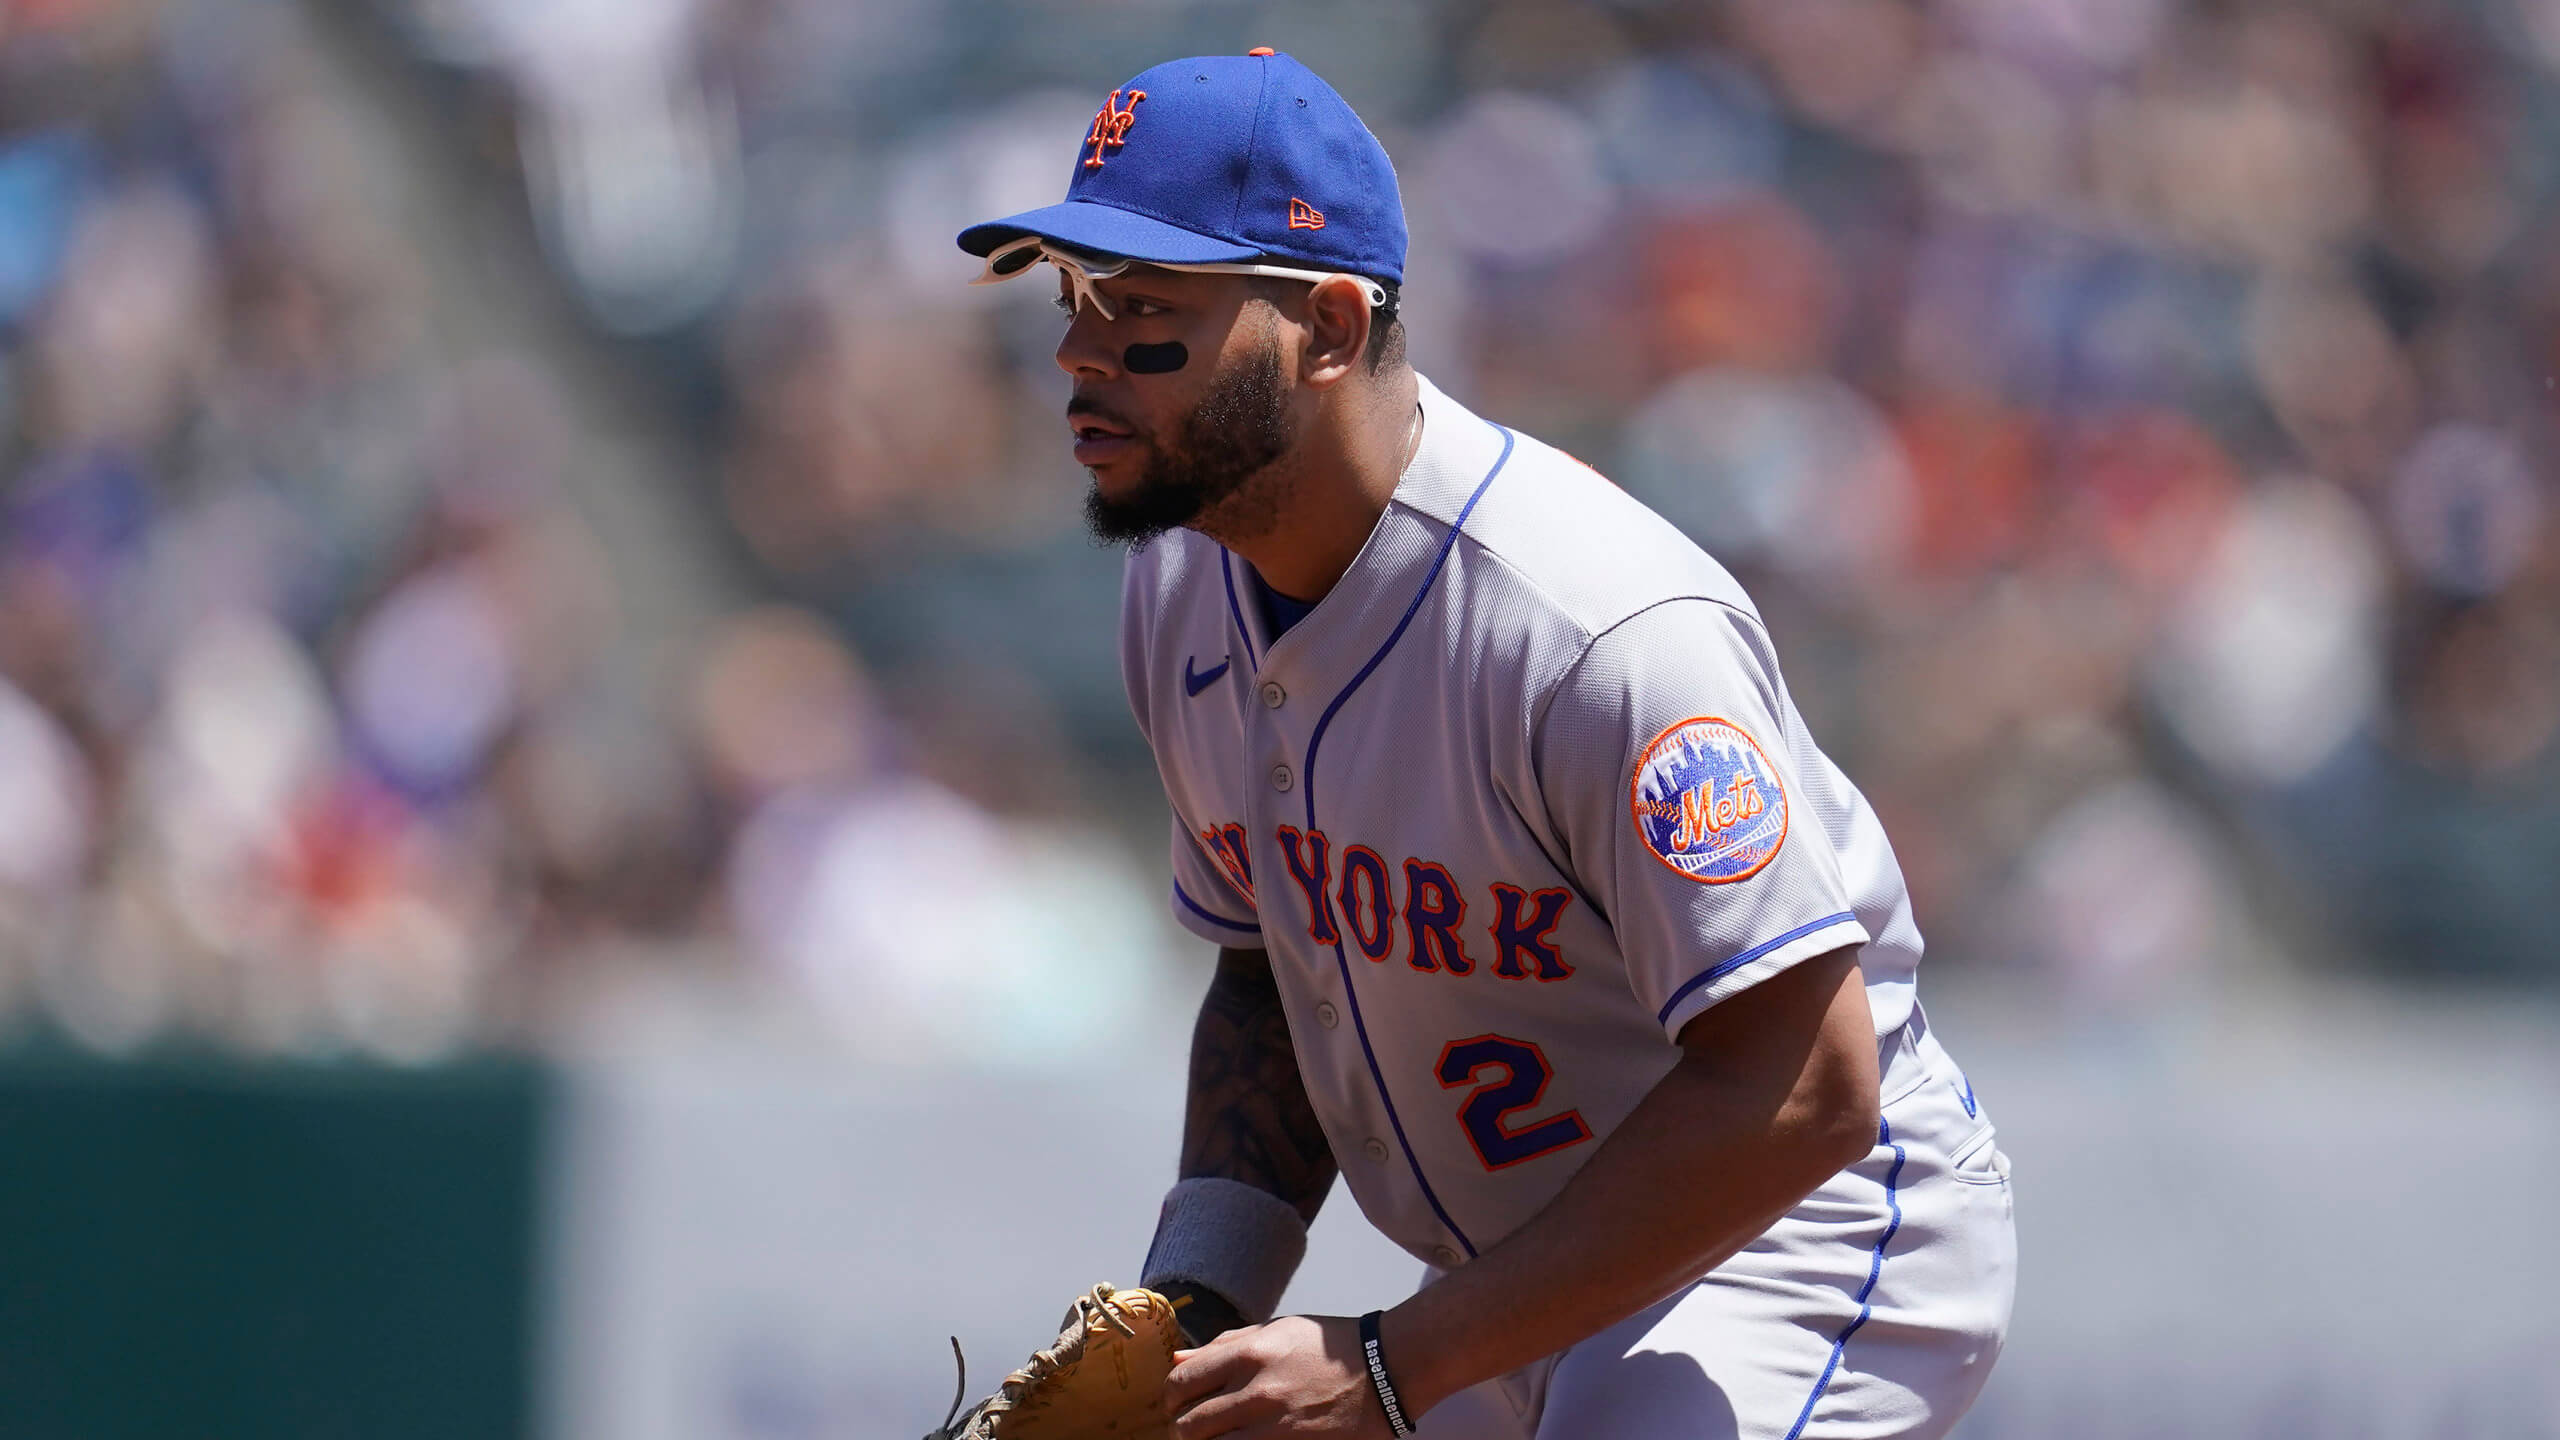 Mets' Dominic Smith examined these greats swings during offseason